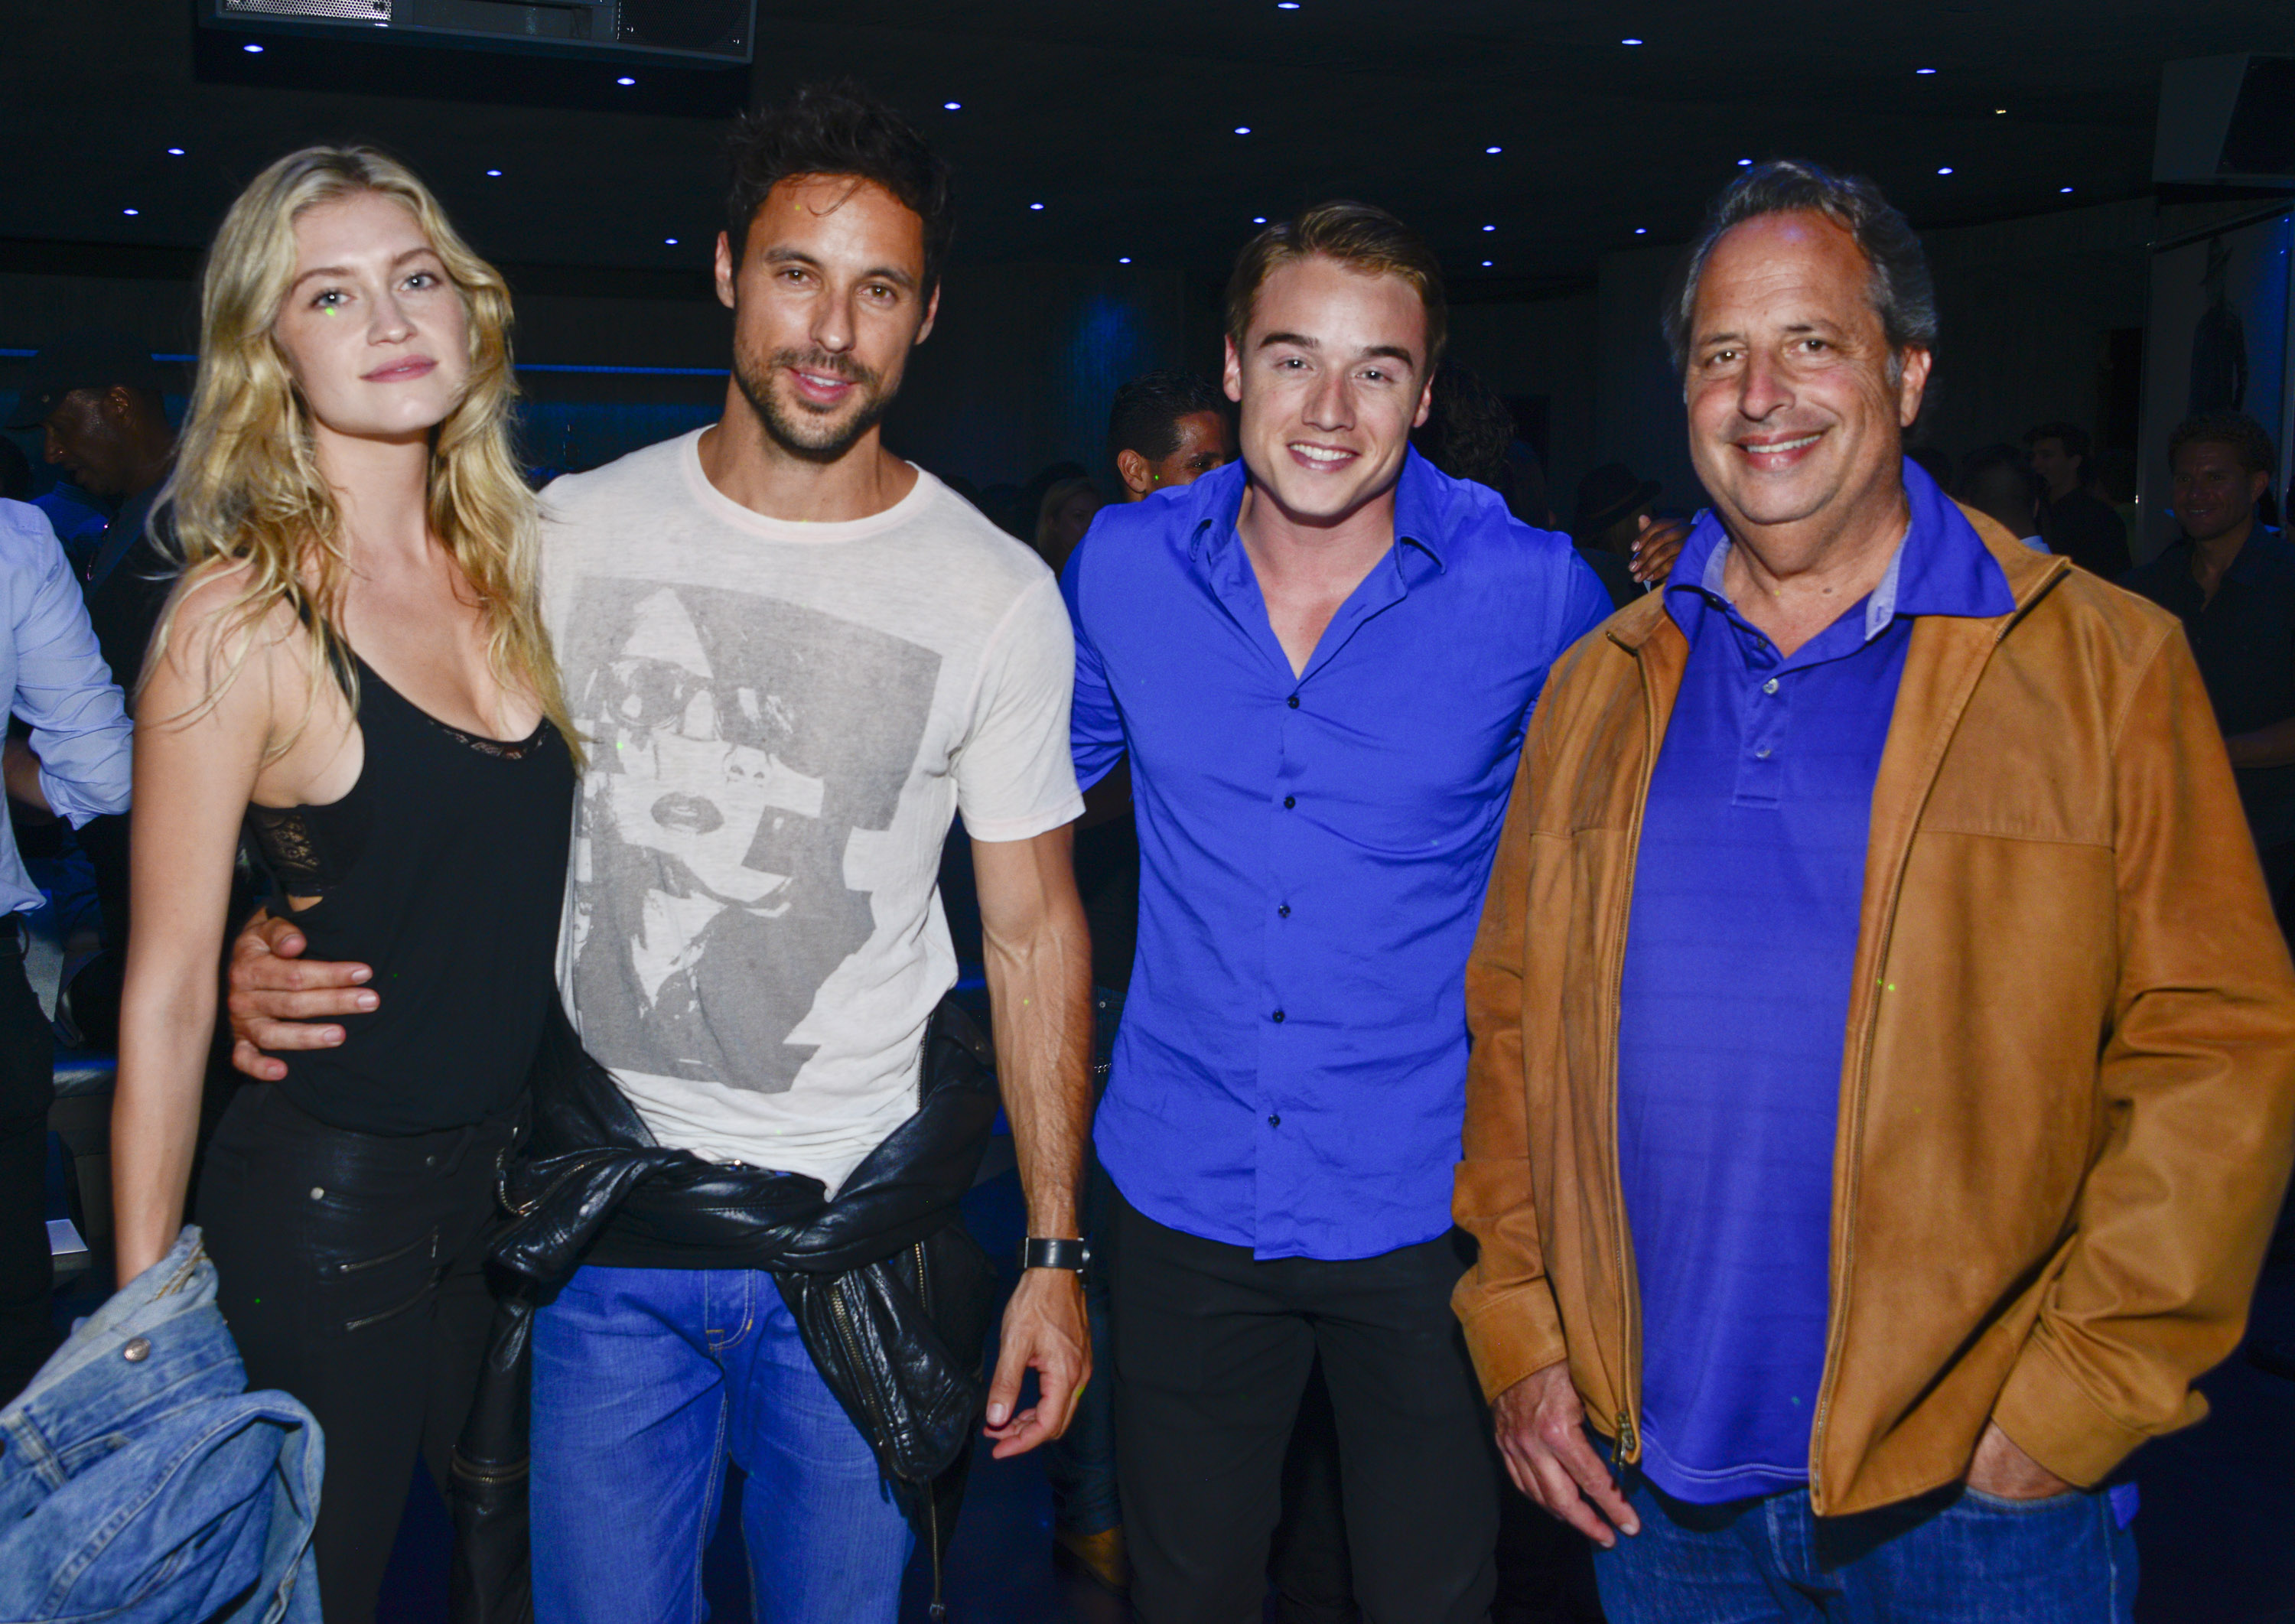 BEVERLY HILLS, CA - JUNE 09:  Model Shane Seng, baseball player Anthony Gomez and actors Brando Eaton and Jon Lovitz attend the Tequila Herradura Ultra Launch Party At The Bootsy Bellows Pop-Up on June 9, 2015 in Beverly Hills, California.  (Photo by Michael Bezjian/Getty Images for Tequila Herradura)